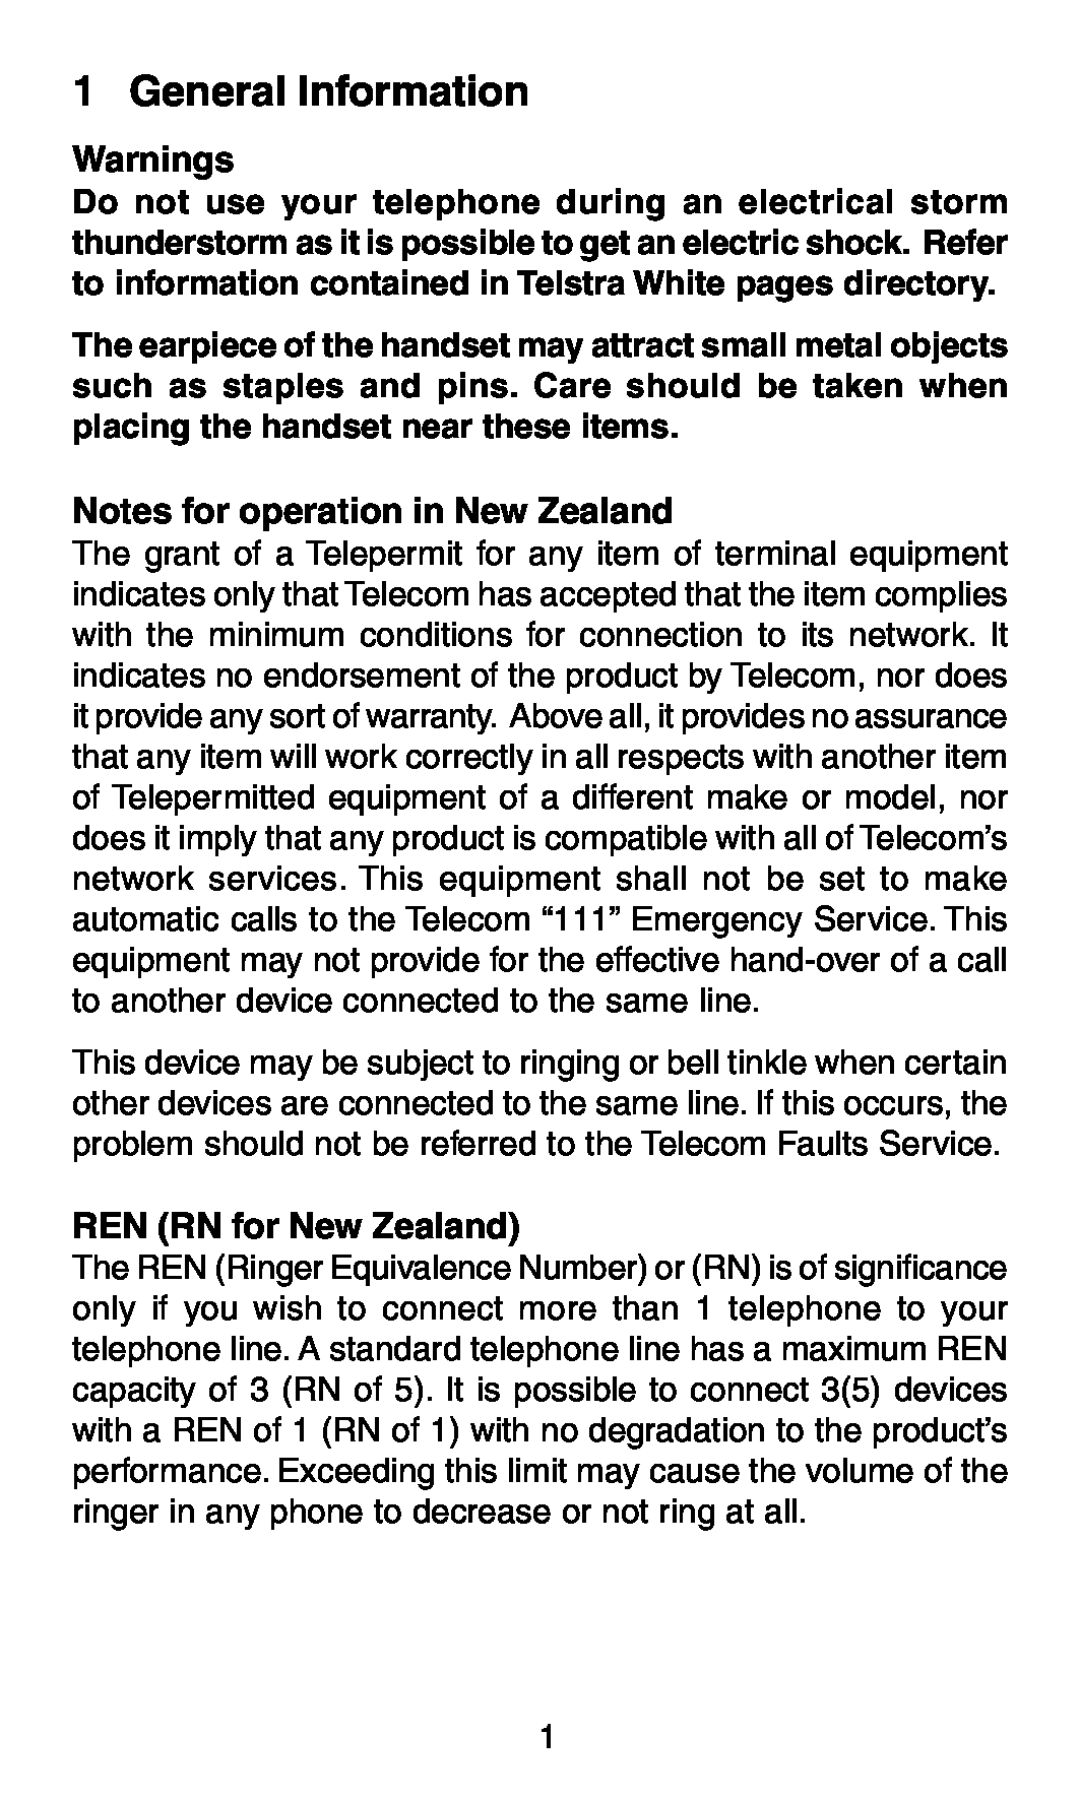 Oricom TP58 manual General Information, Warnings, Notes for operation in New Zealand, REN RN for New Zealand 